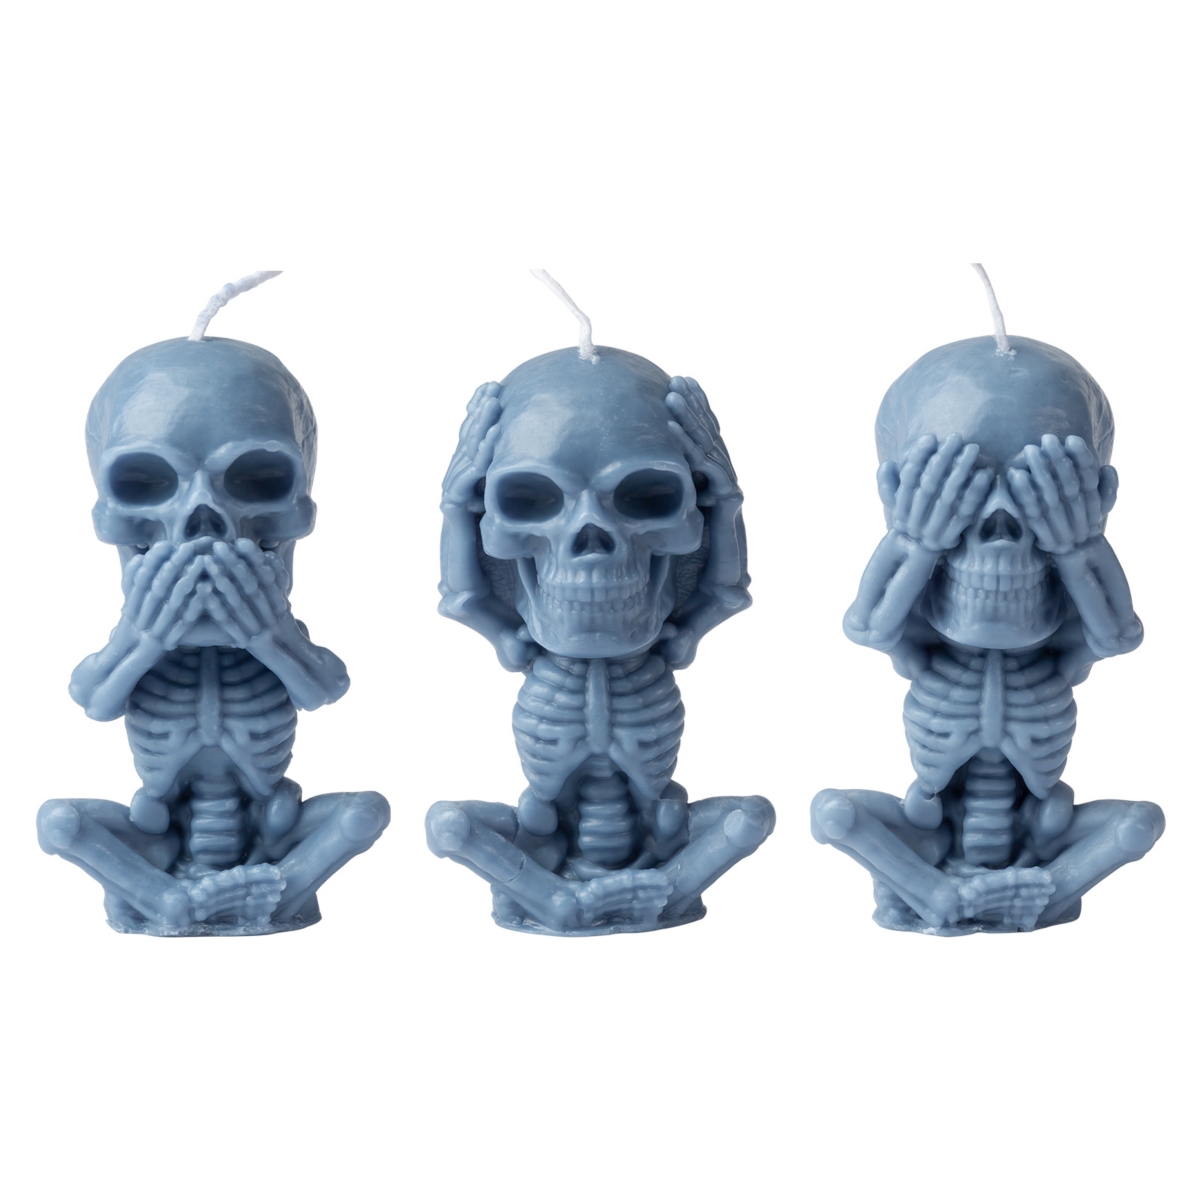 Skull Creative Candle for Spooky Halloween Decoration - 3 pack - Blue